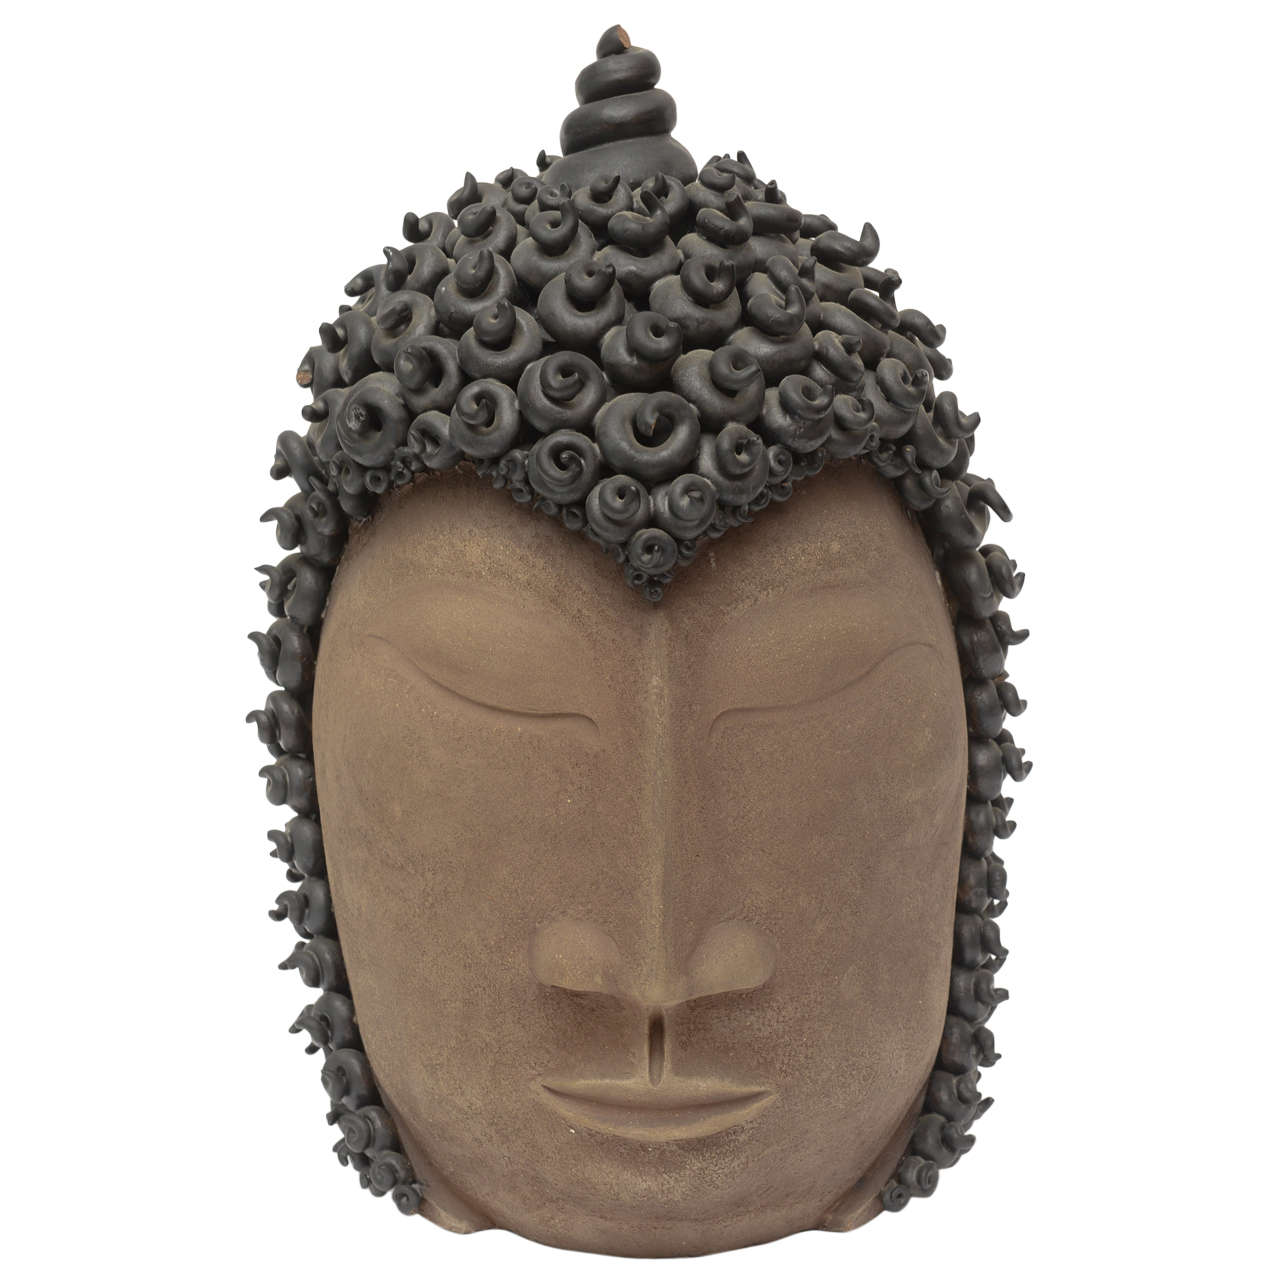 Signed Pottery Buddha Head Sculpture